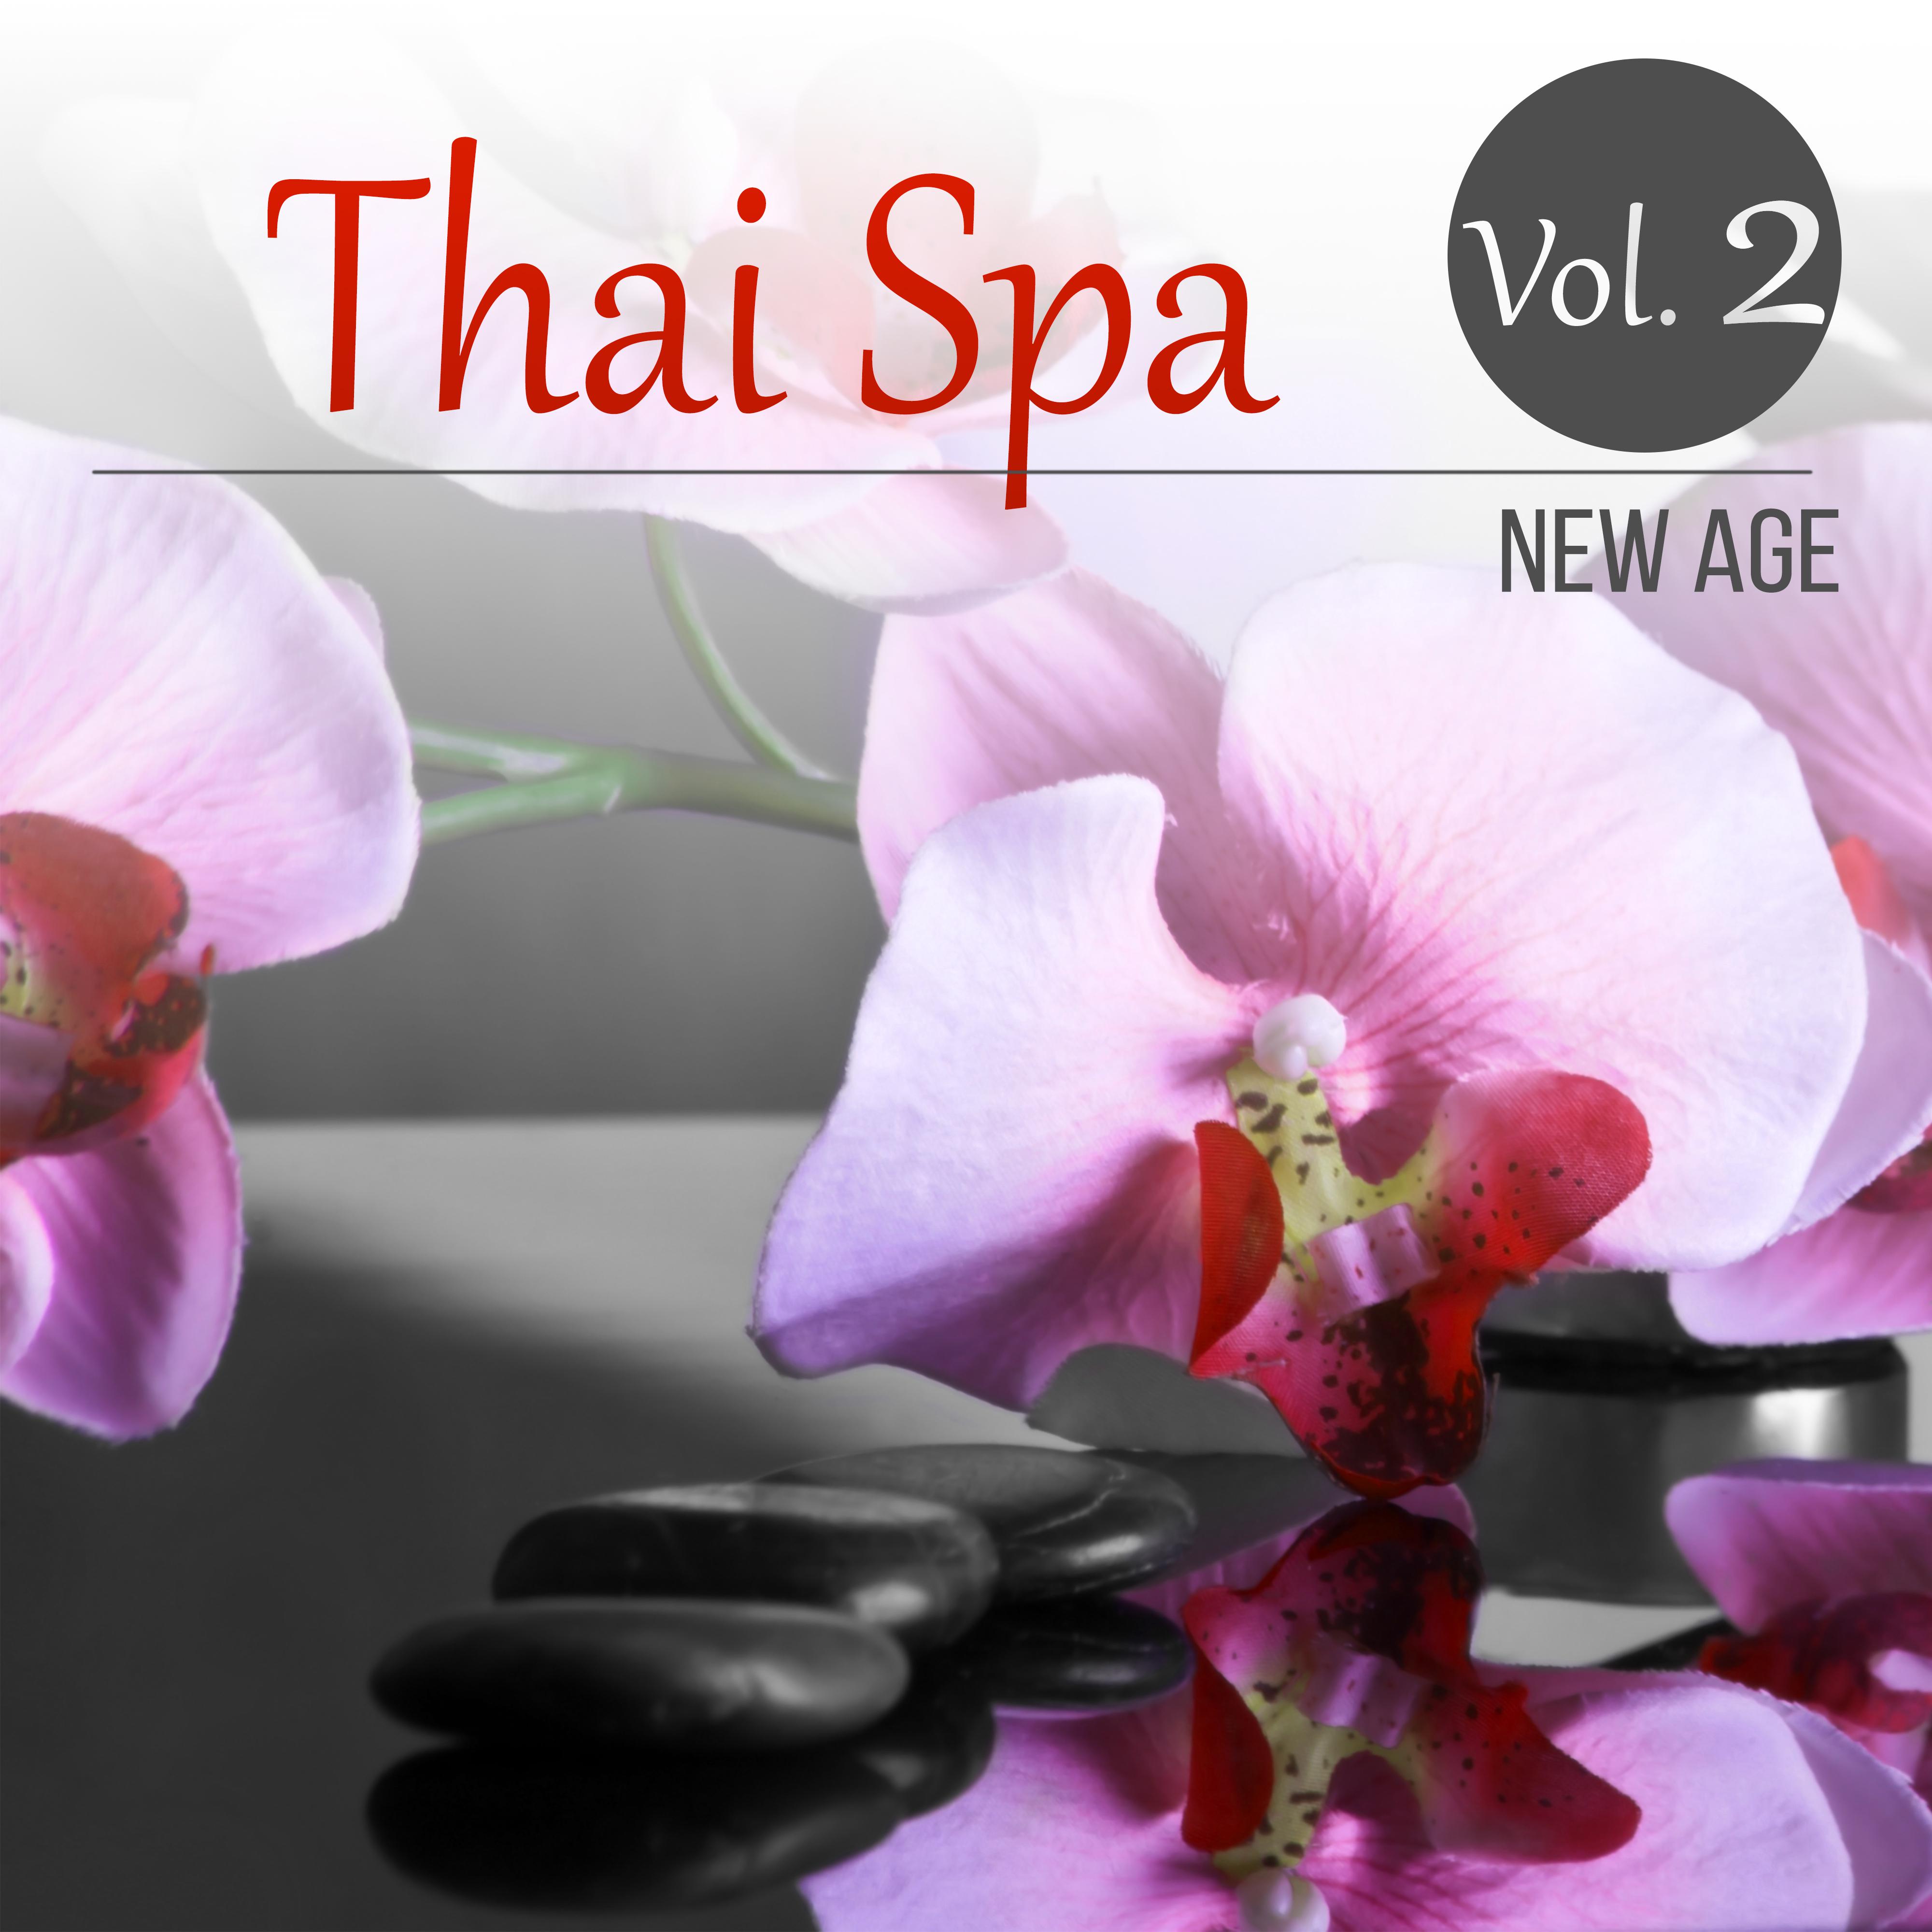 Thai Spa New Age Vol. 2  Asian Sounds, Well Being, Asian Massage, Tranquility Music, Relaxing Music, Spa Wellness, Music Therapy